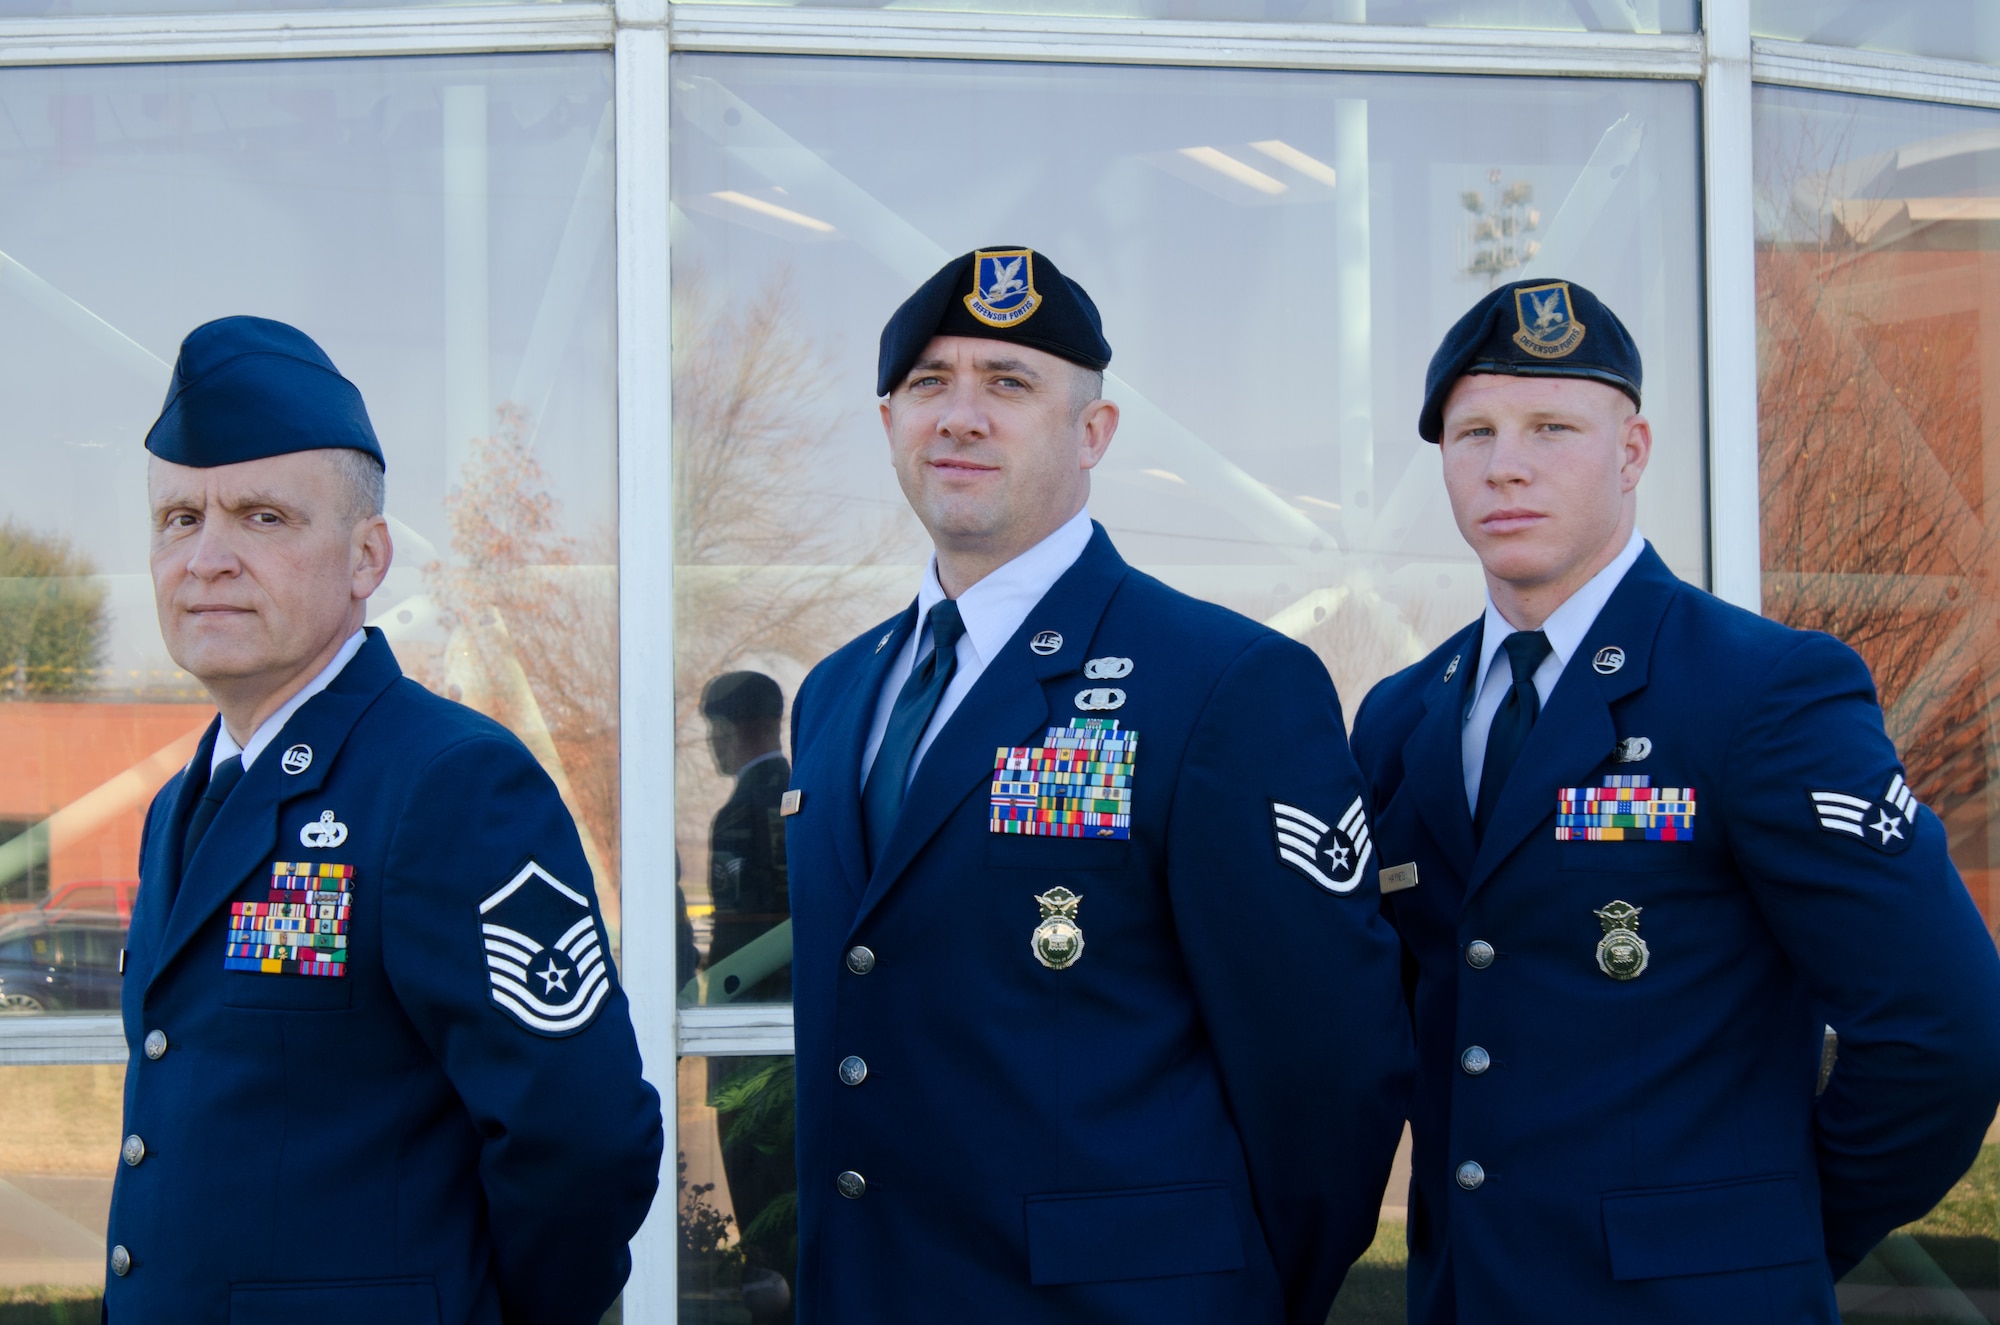 The Missouri Air National Guard, 139th Airlift Wing Outstanding Airmen of the Year, from left, Master Sgt. Thomas Triplett, Staff Sgt. Troy Green and Senior Airman Gregory Haynes, are recognised for their accomplishments Nov. 3 at Rosecrans Air National Guard Base, St Joseph, Mo. (U.S. Air Force photo/Senior Airman Kelsey Ramirez) (Released)